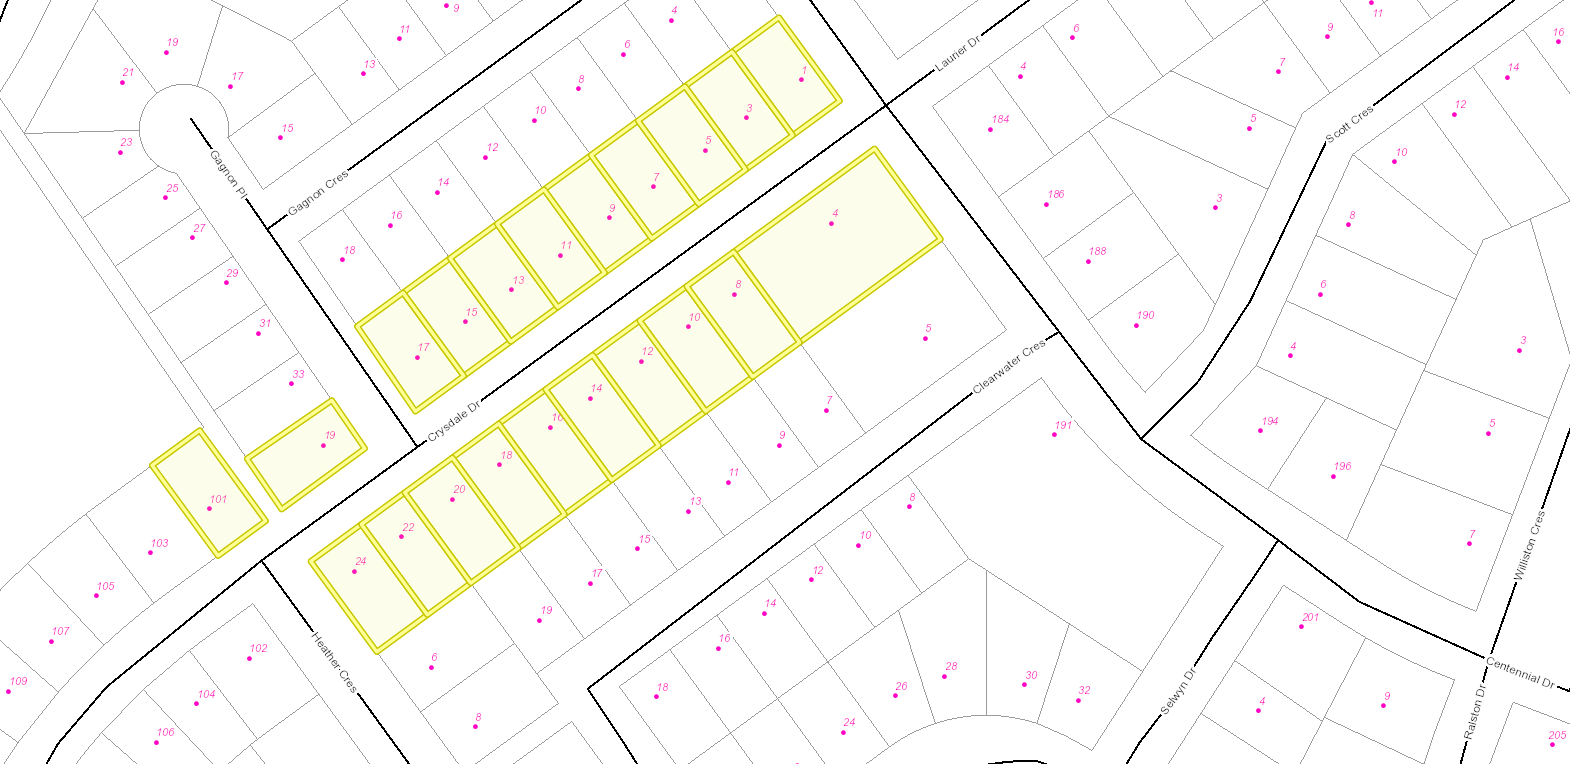 map of affected properties along crysdale drive